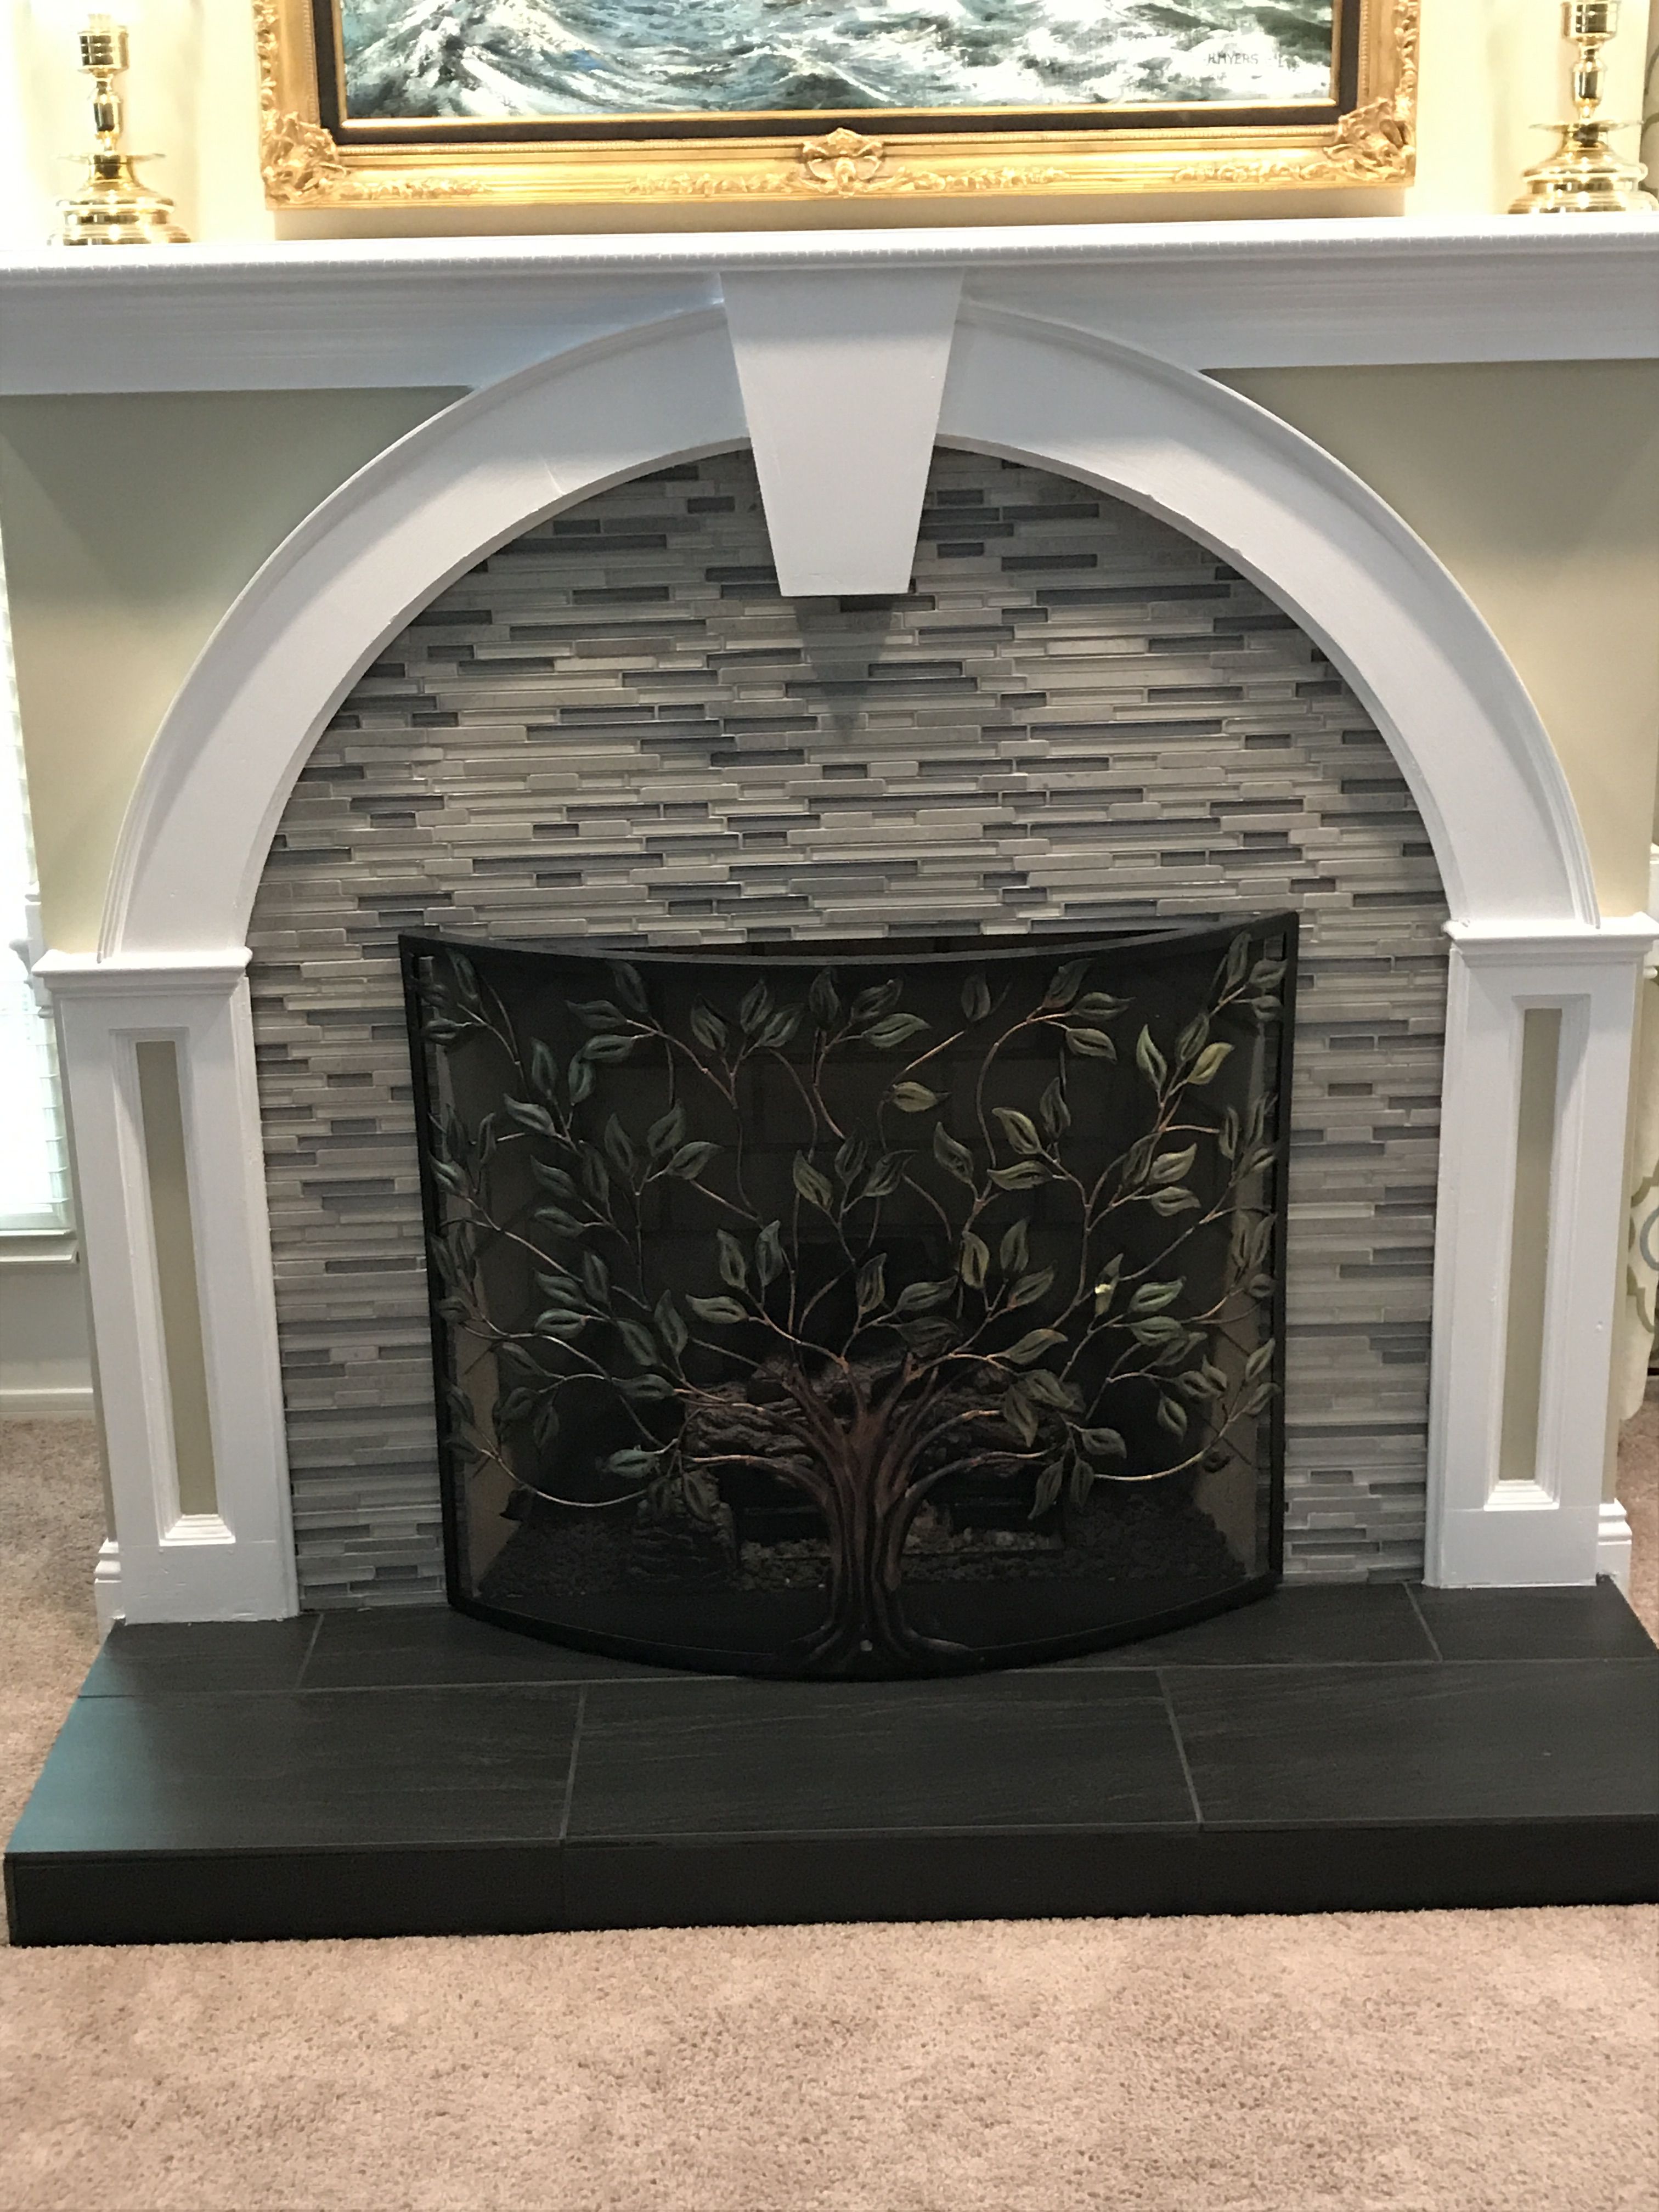 Glass Stone Fireplace Luxury after Using Arlington Stria Glass and Stone Wall Tile for